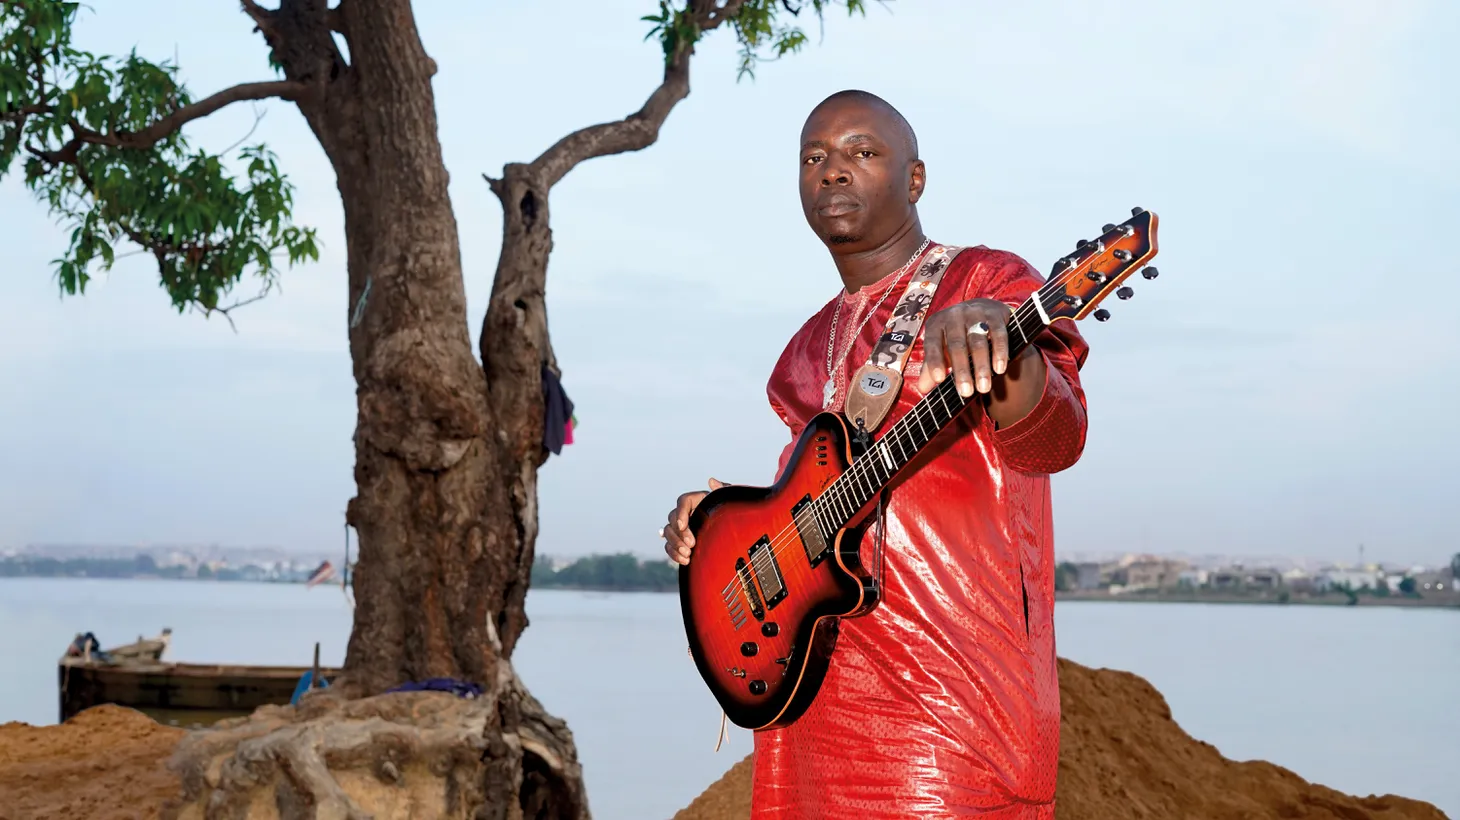 Master Malian guitarist Vieux Farka Touré reconnects with the desert blues his late father pioneered on a forthcoming album “Les Racines,” or “The Roots,” slated for early summer, and his first since 2017.